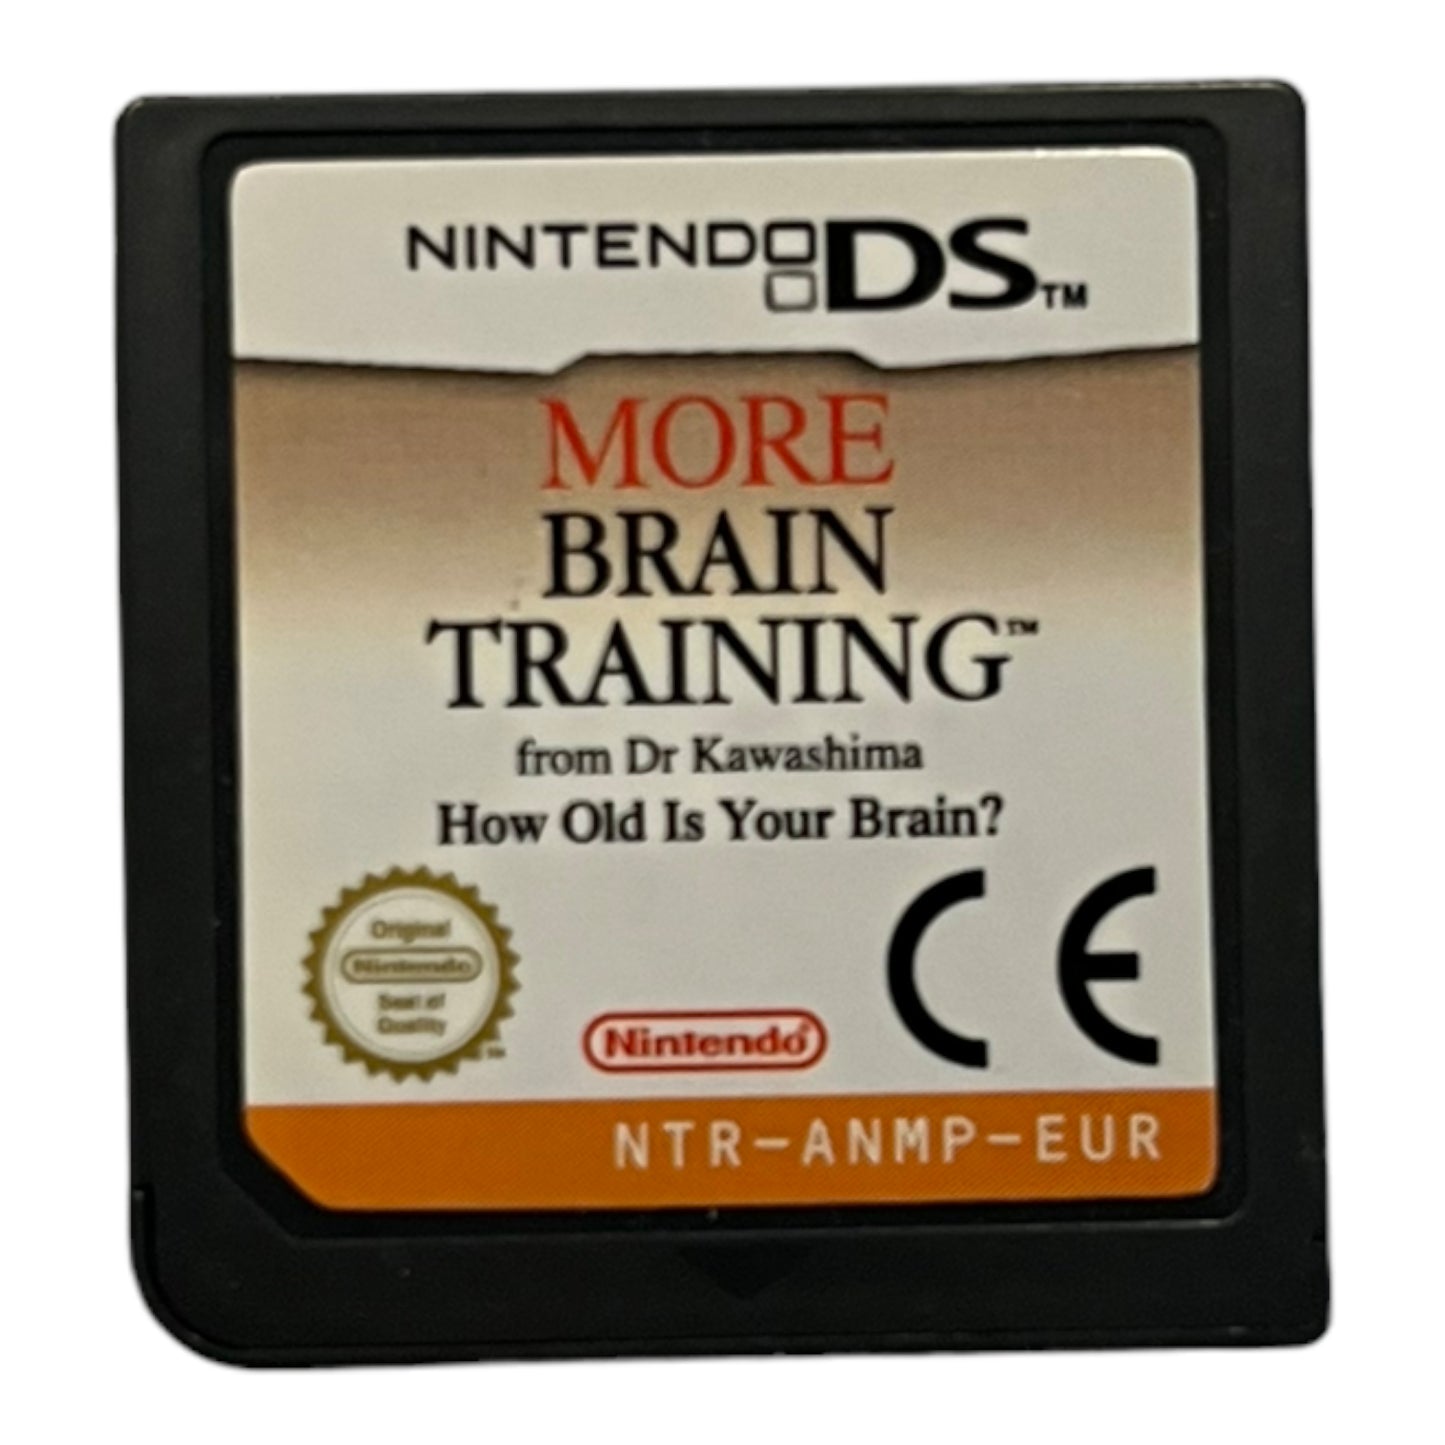 More Brain Training from Dr Kawashima: How Old Is Youre Brain? (Losse Cartridge)